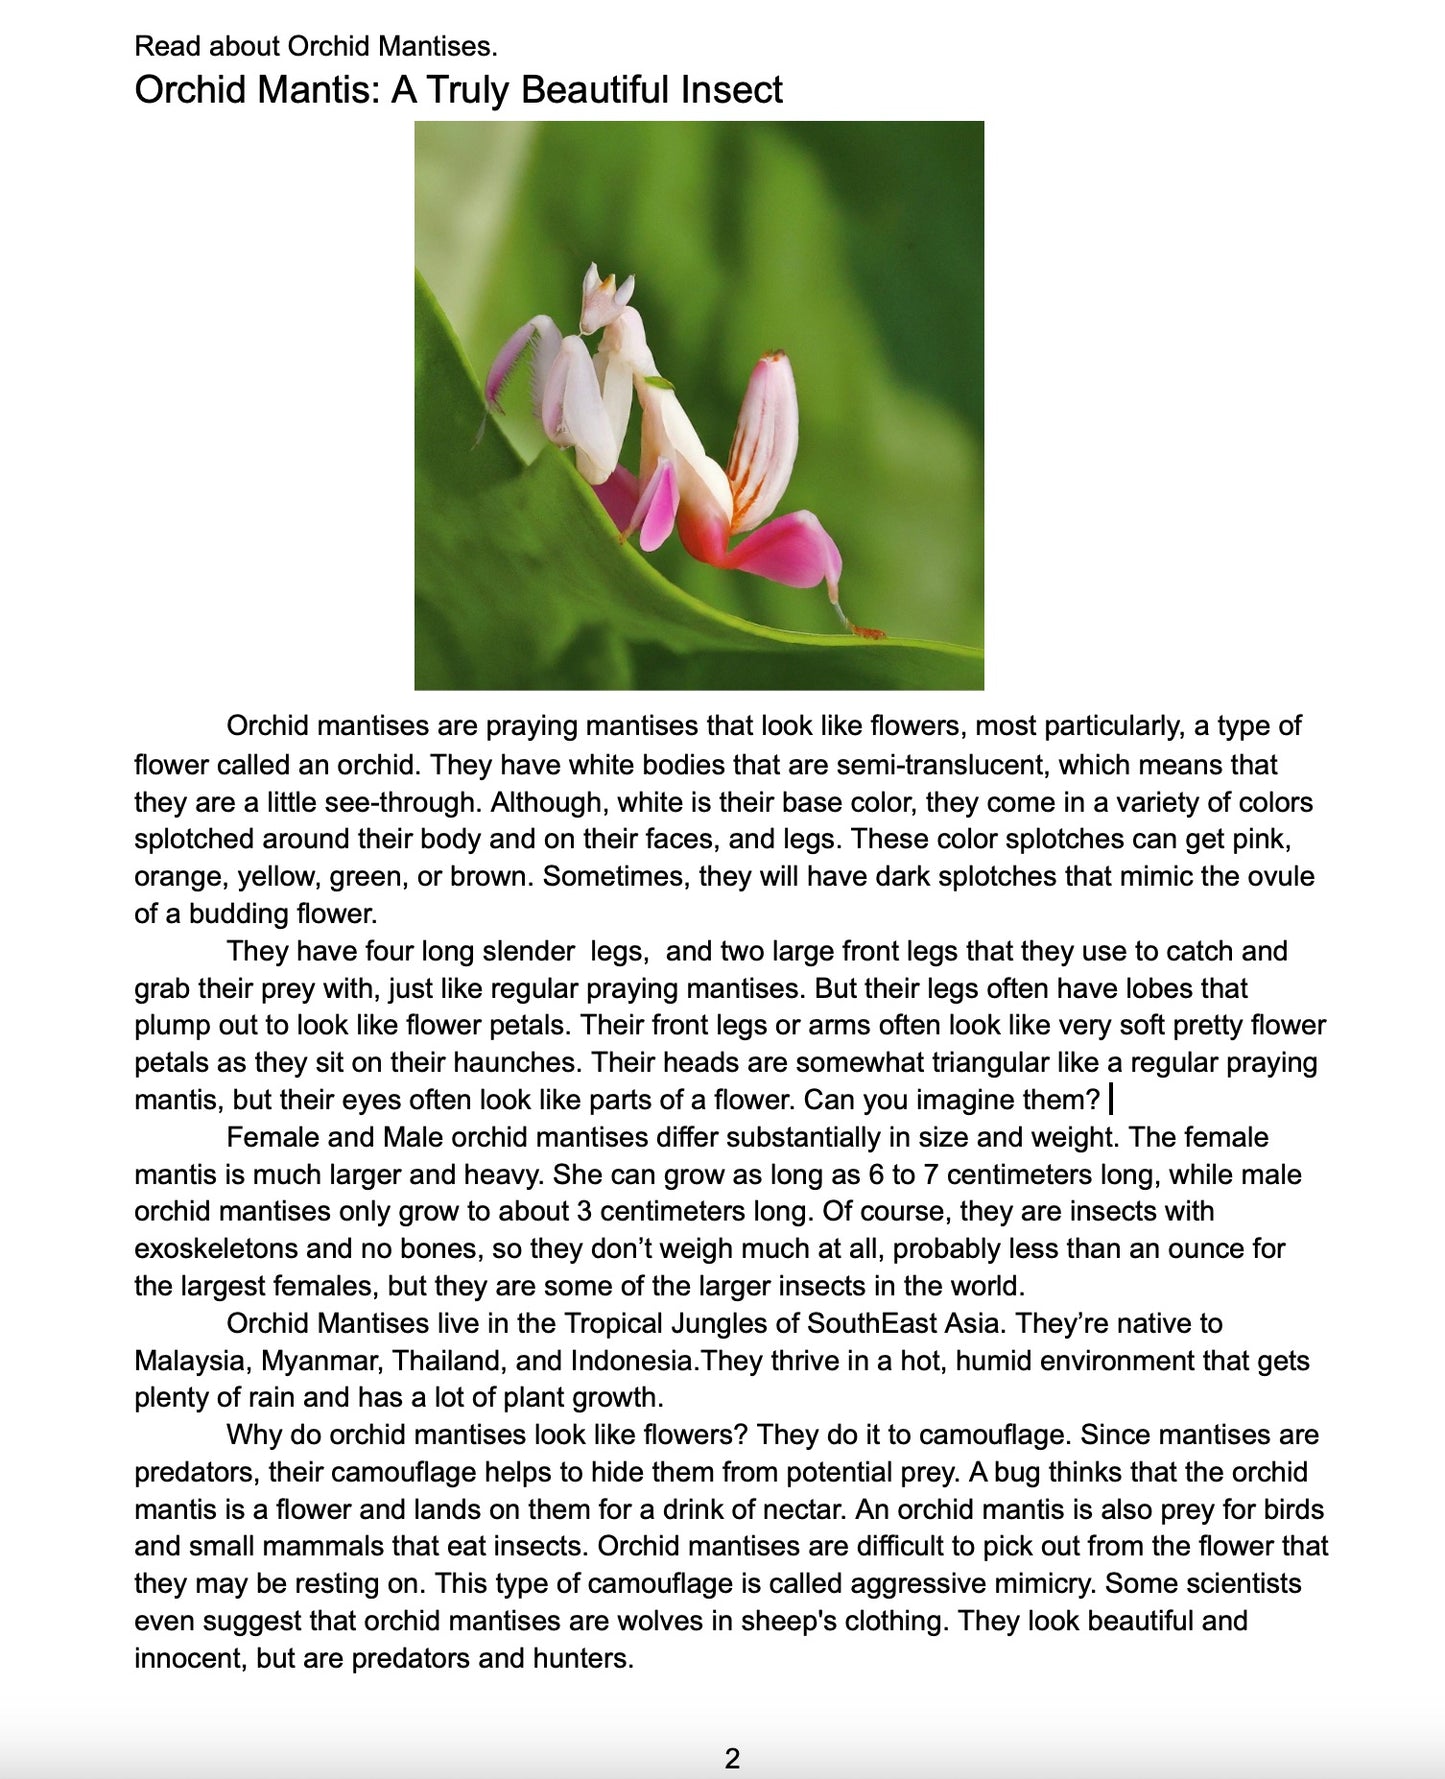 The Orchid Mantis